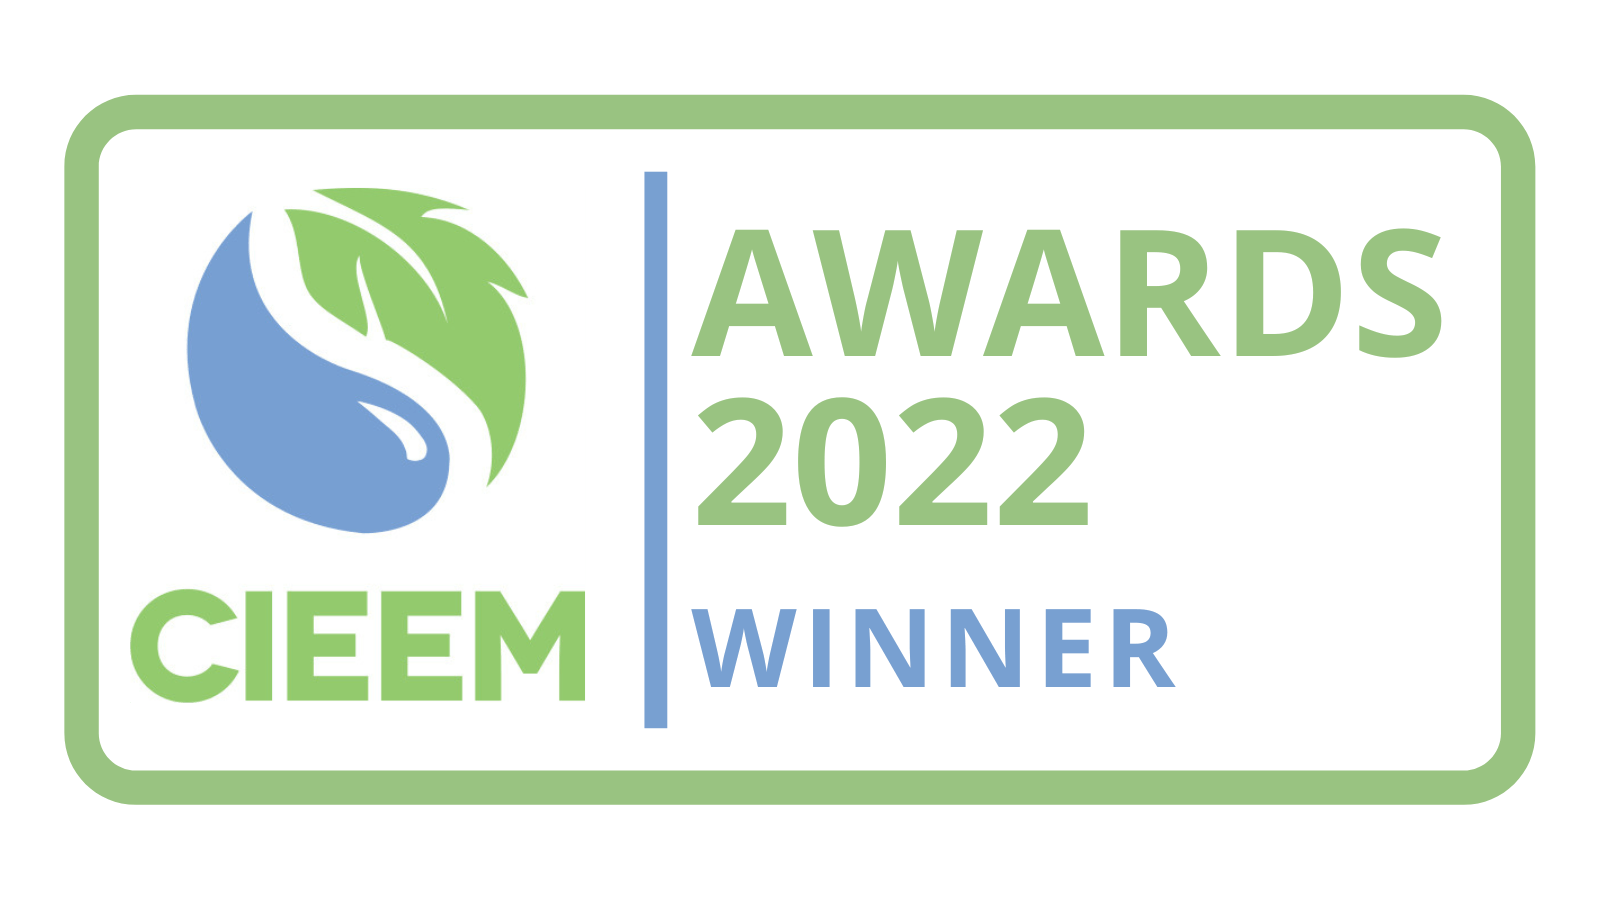 Spains Hall Estate won the CIEEM 2022 Best Practice – Small Scale Nature Conservation Award